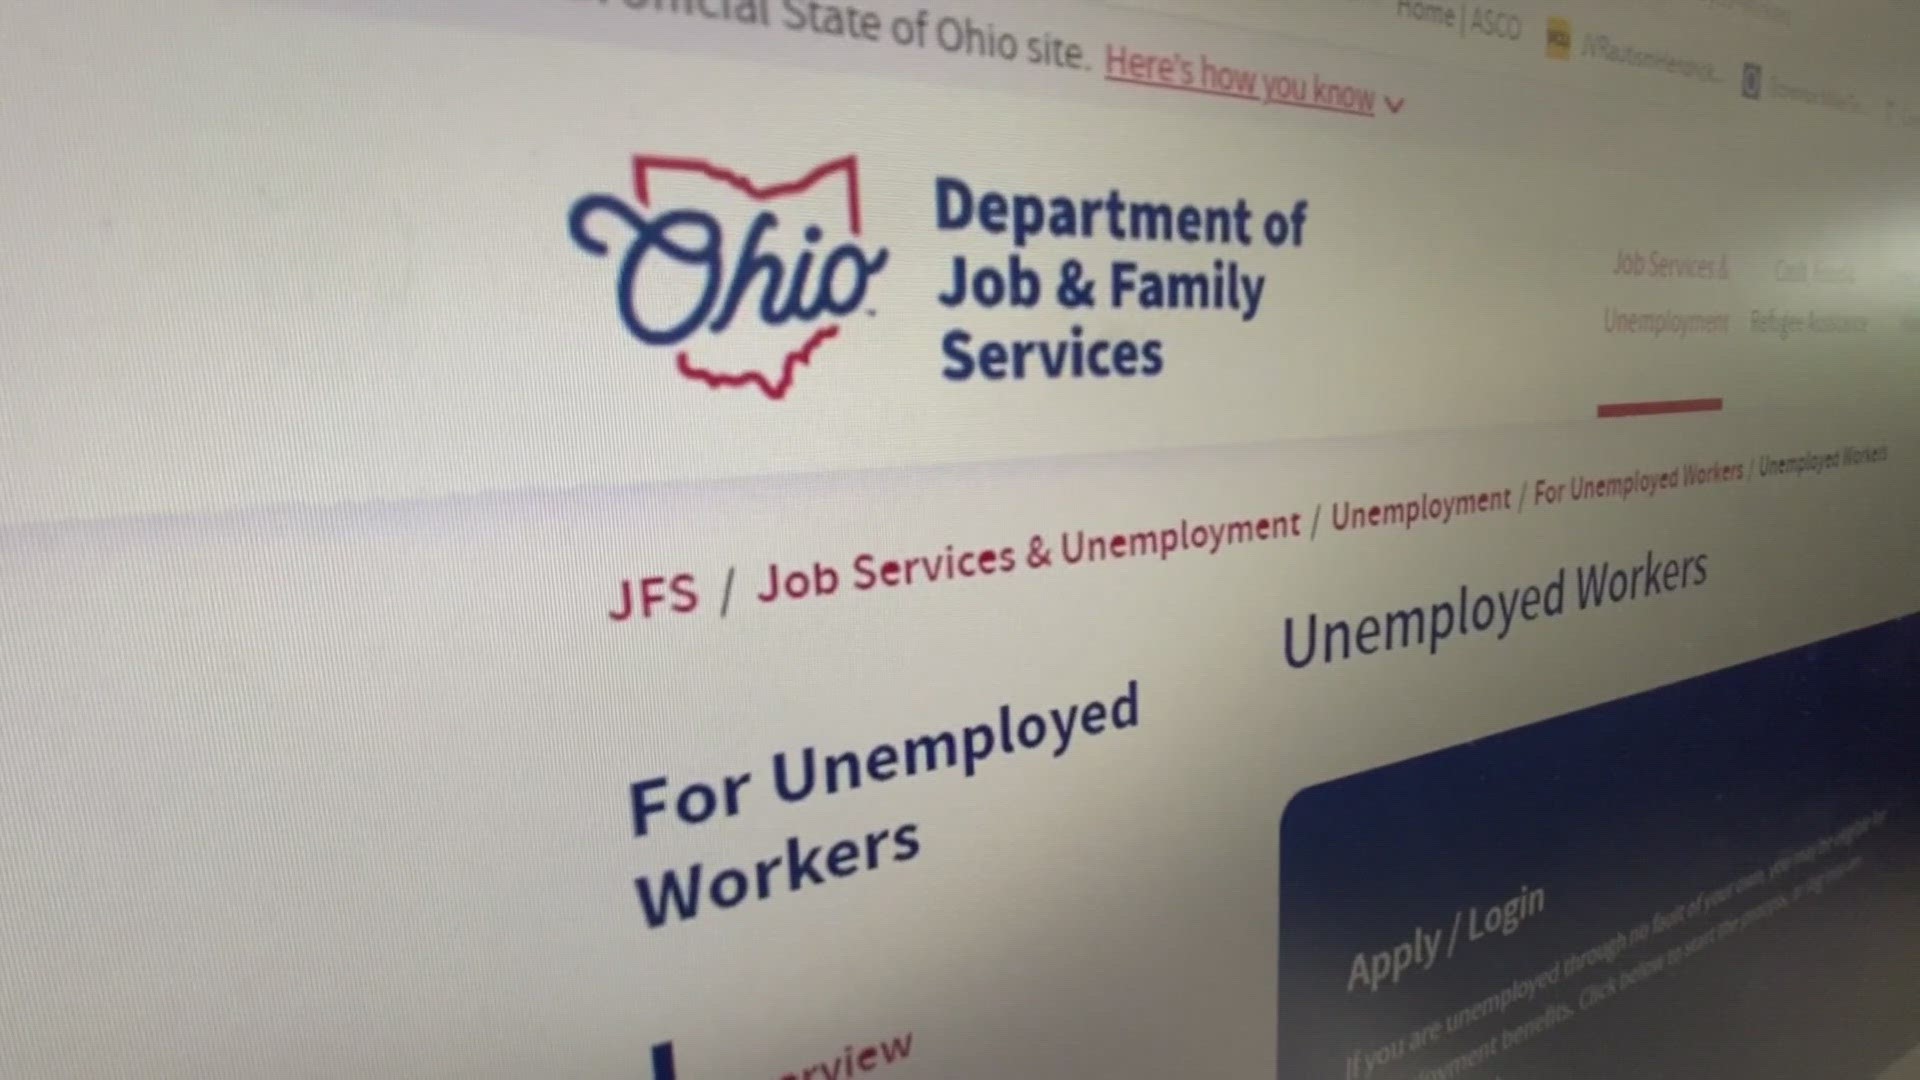 One month after thousands of Ohioans were locked out of their unemployment accounts – many have regained access.